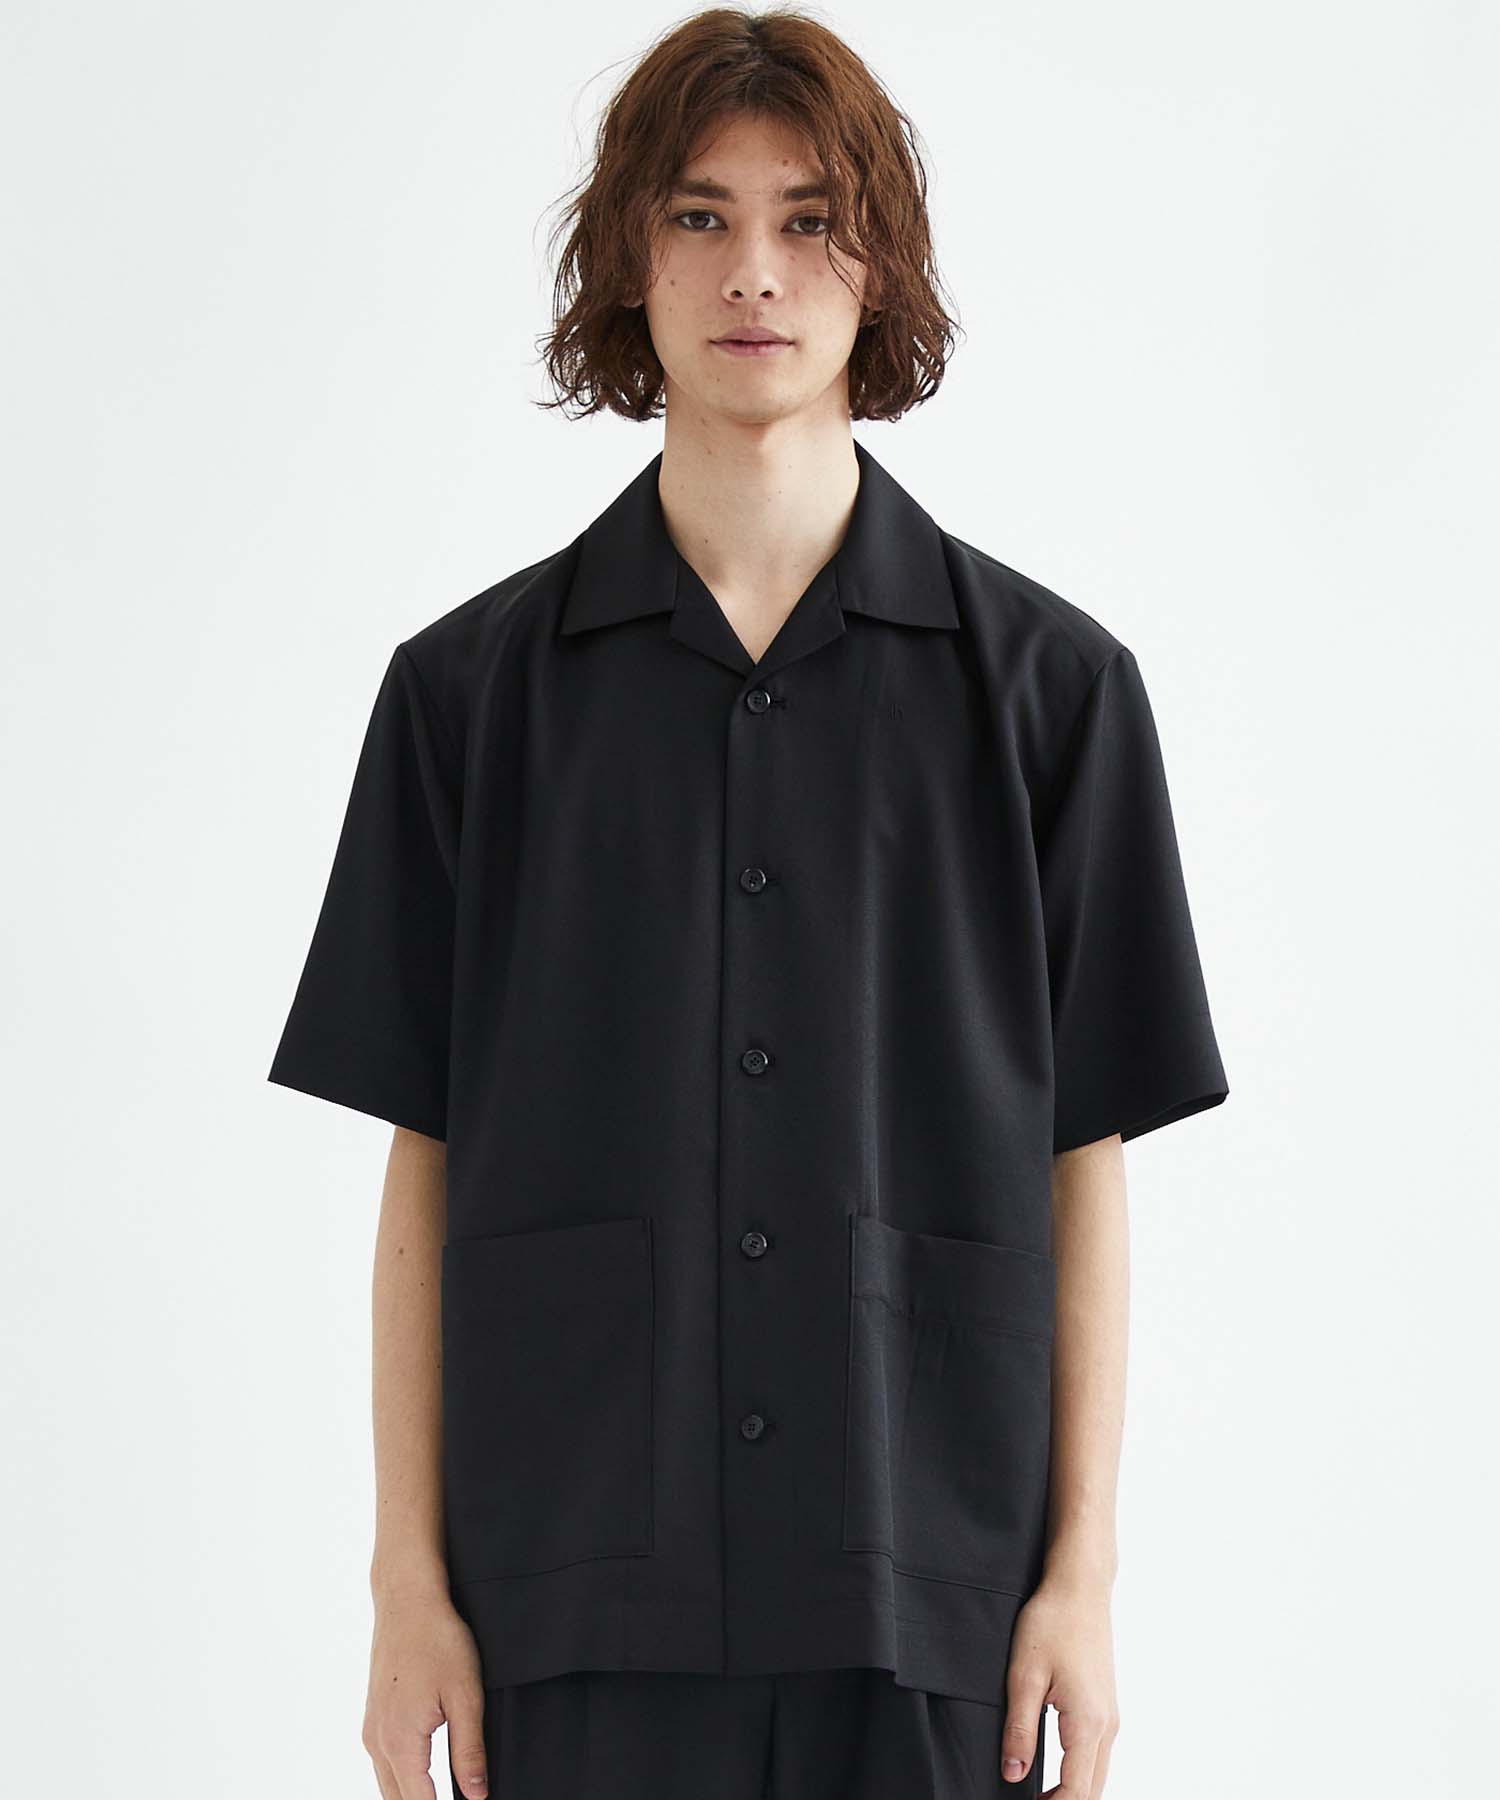 Open collar Shirt S/S th products